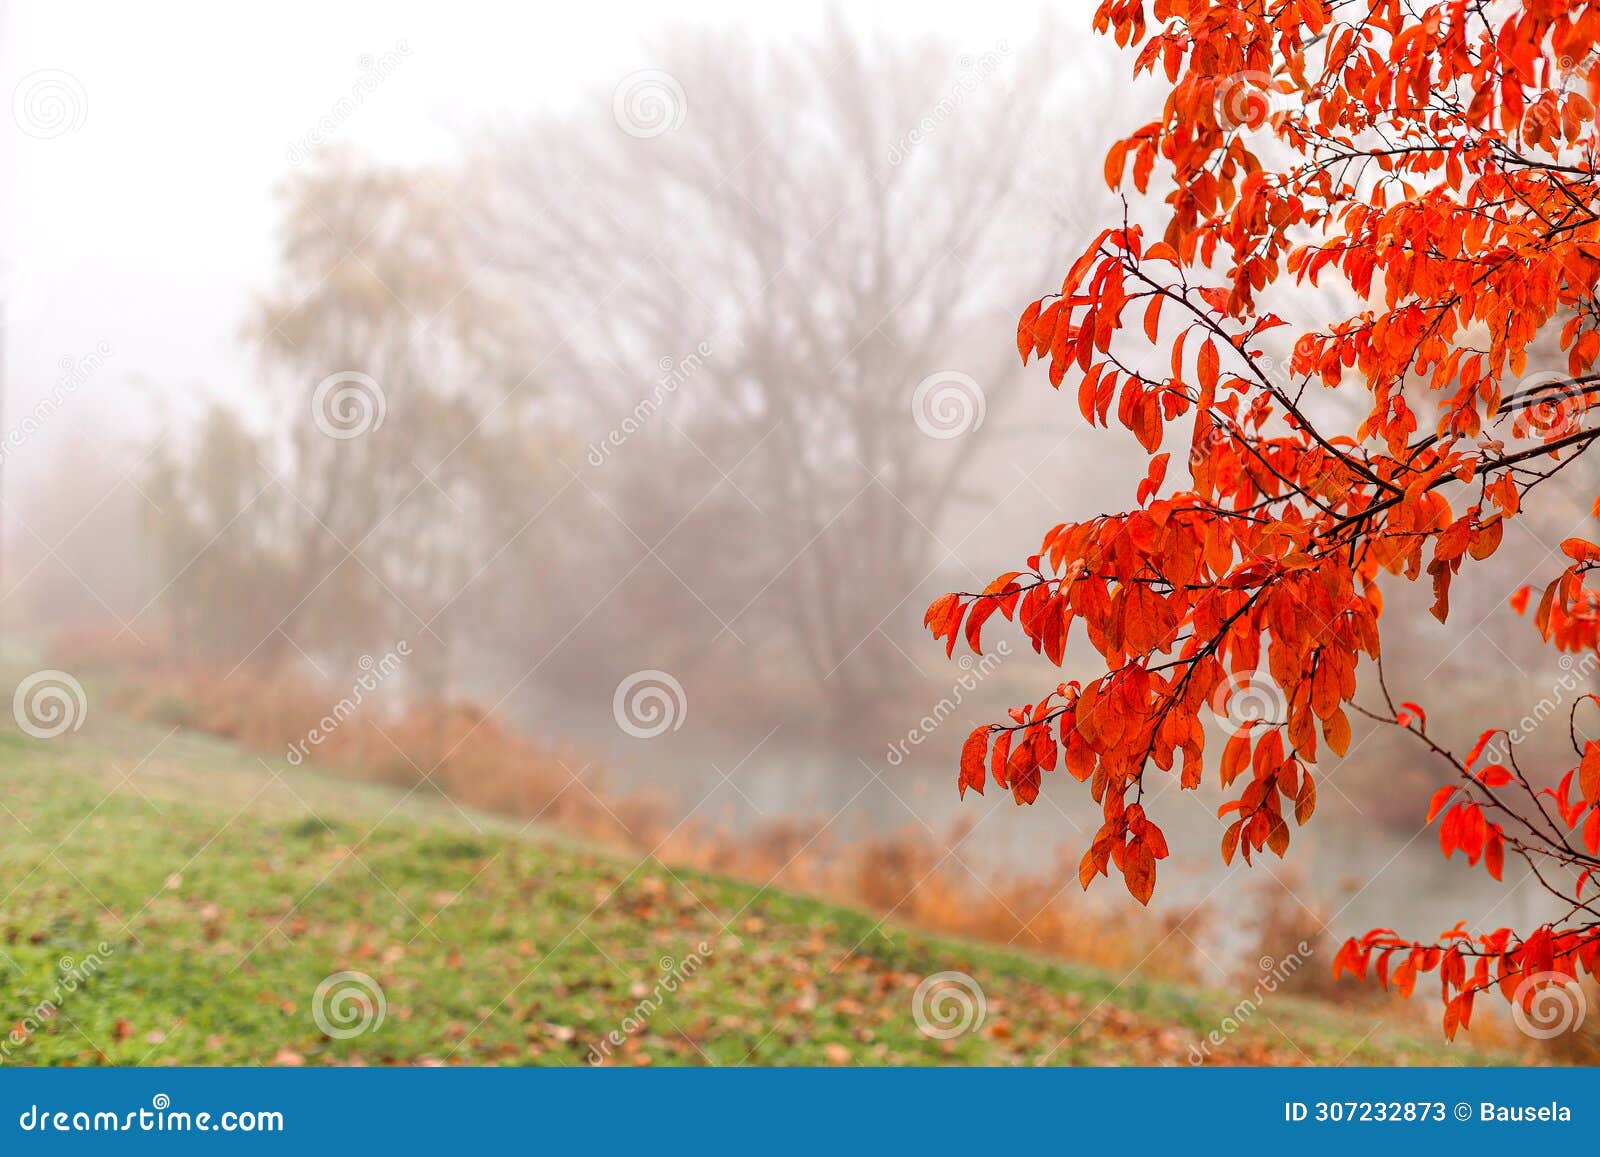 natural scene of a foggy day framed by red leaves in the foreground.